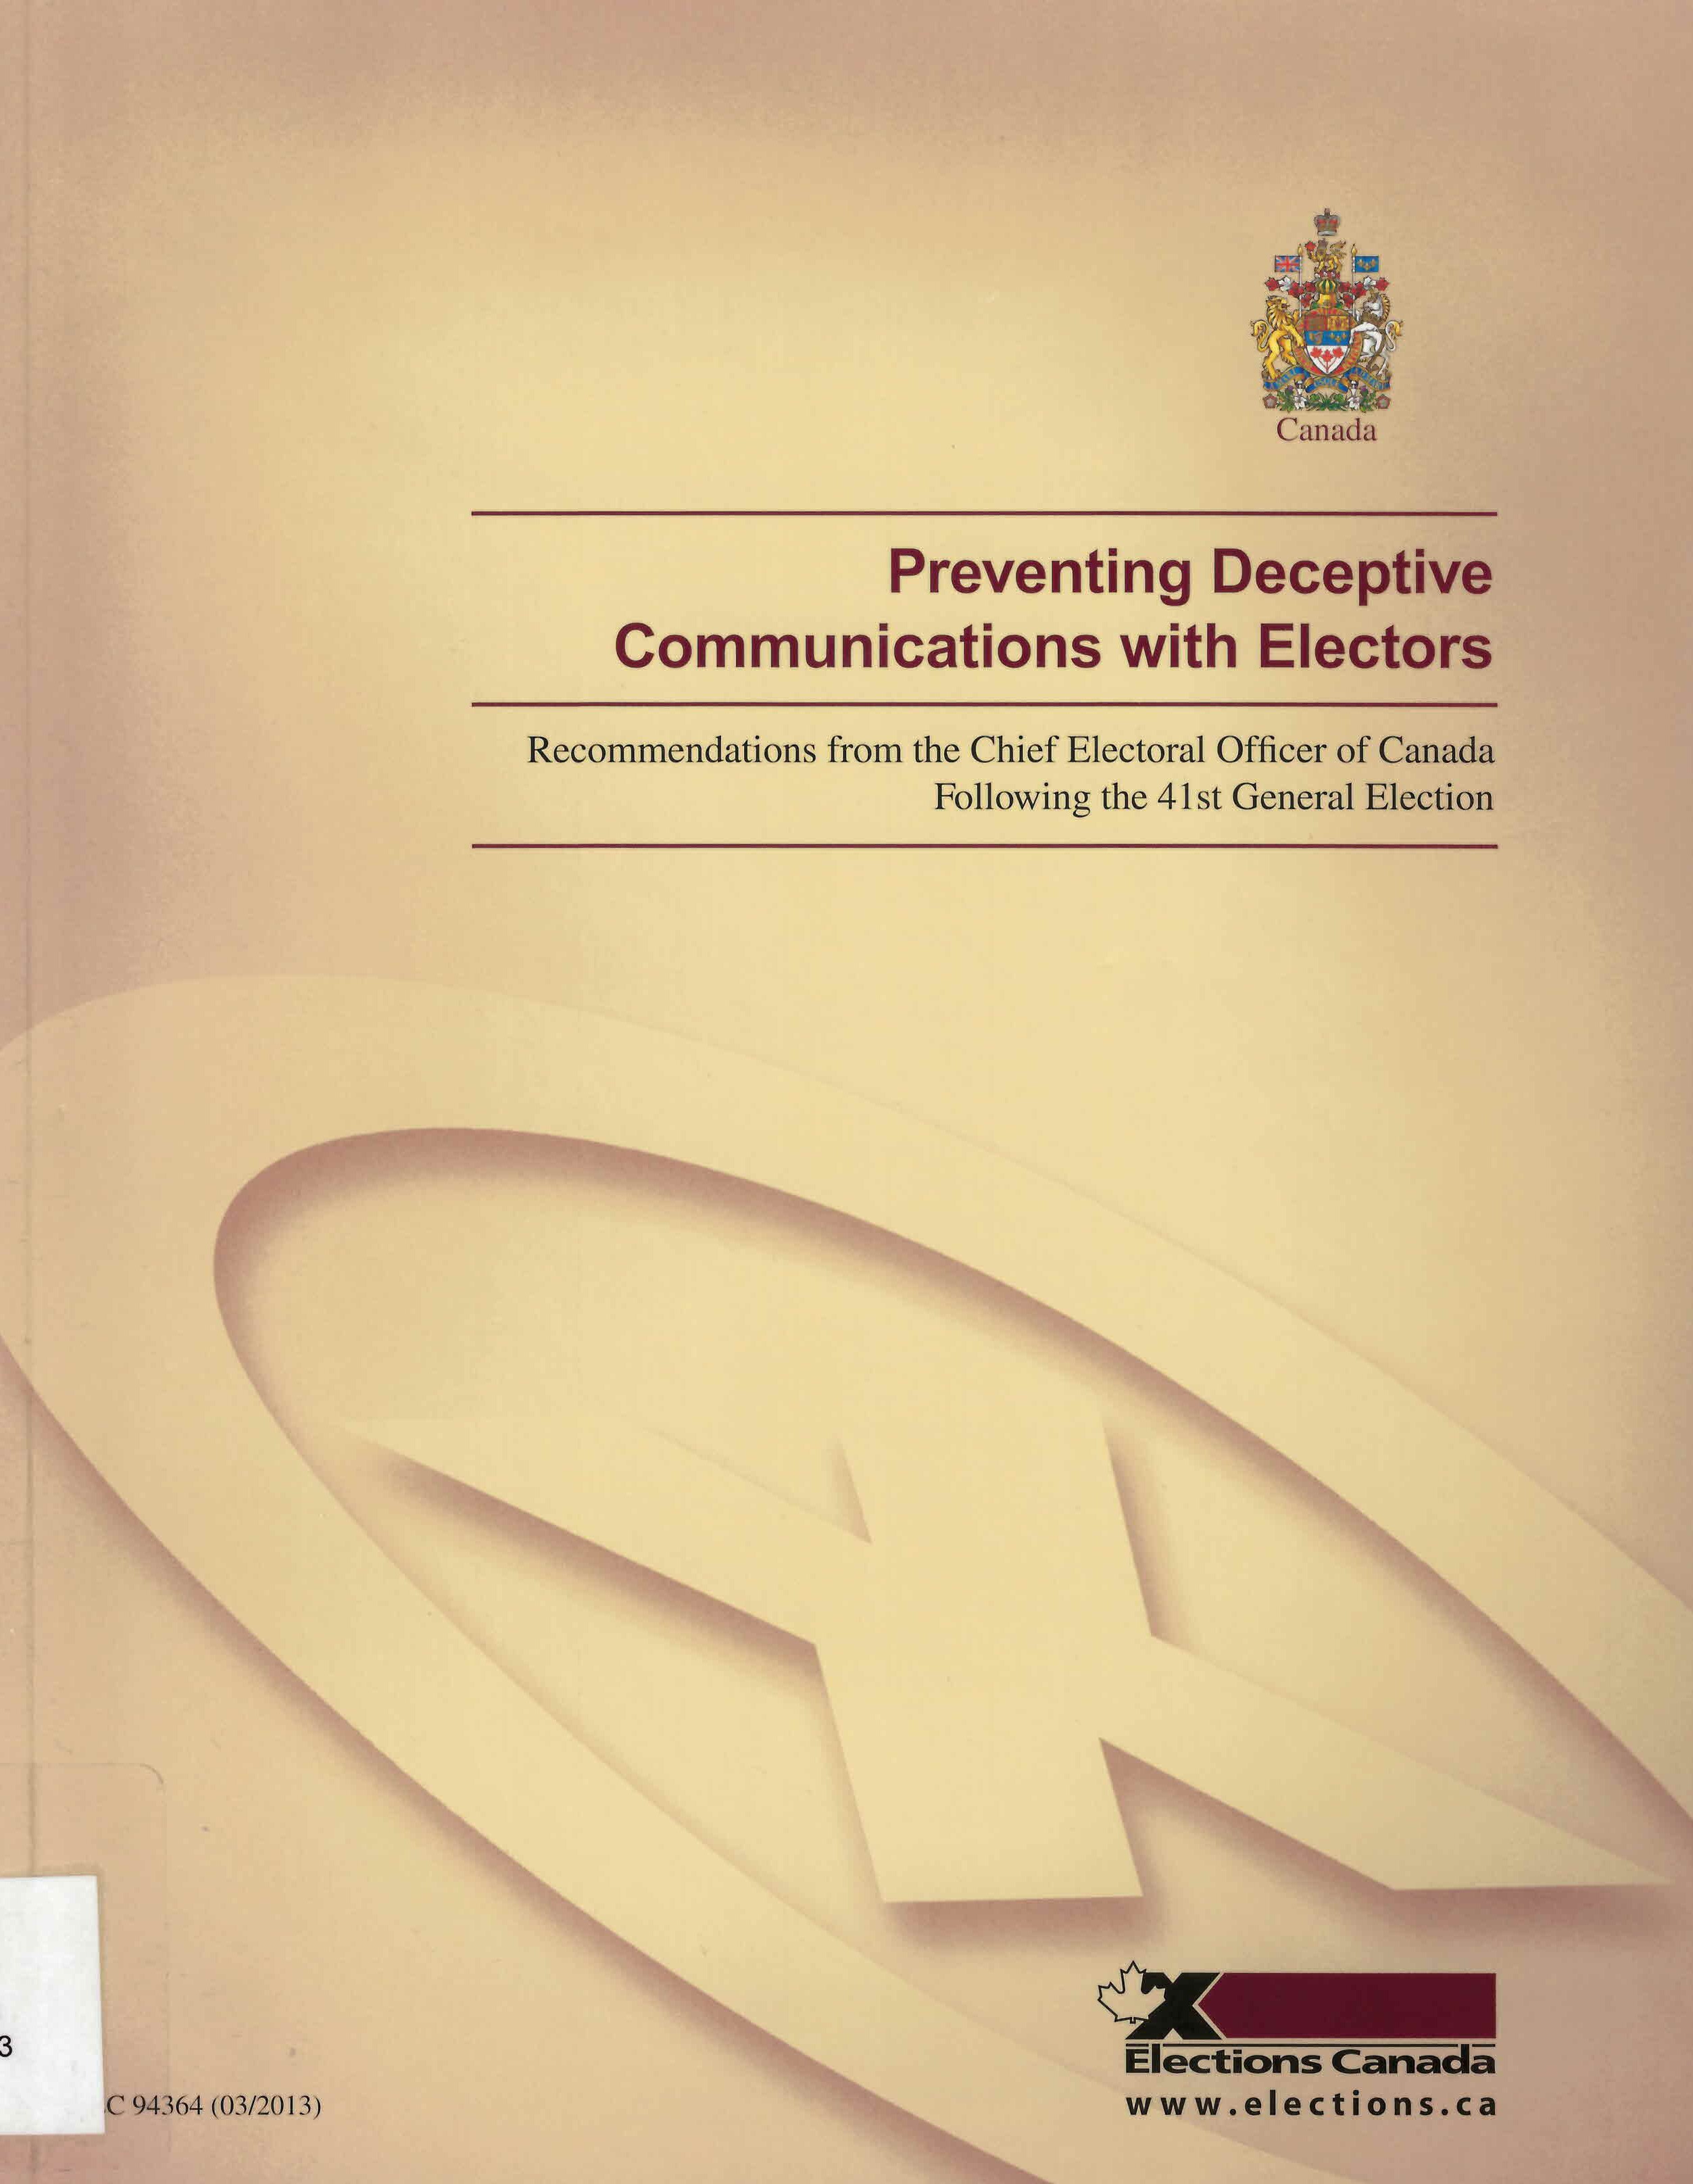 Preventing deceptive communications with electors : recommendations from the Chief Electoral Officer following the 41st general election